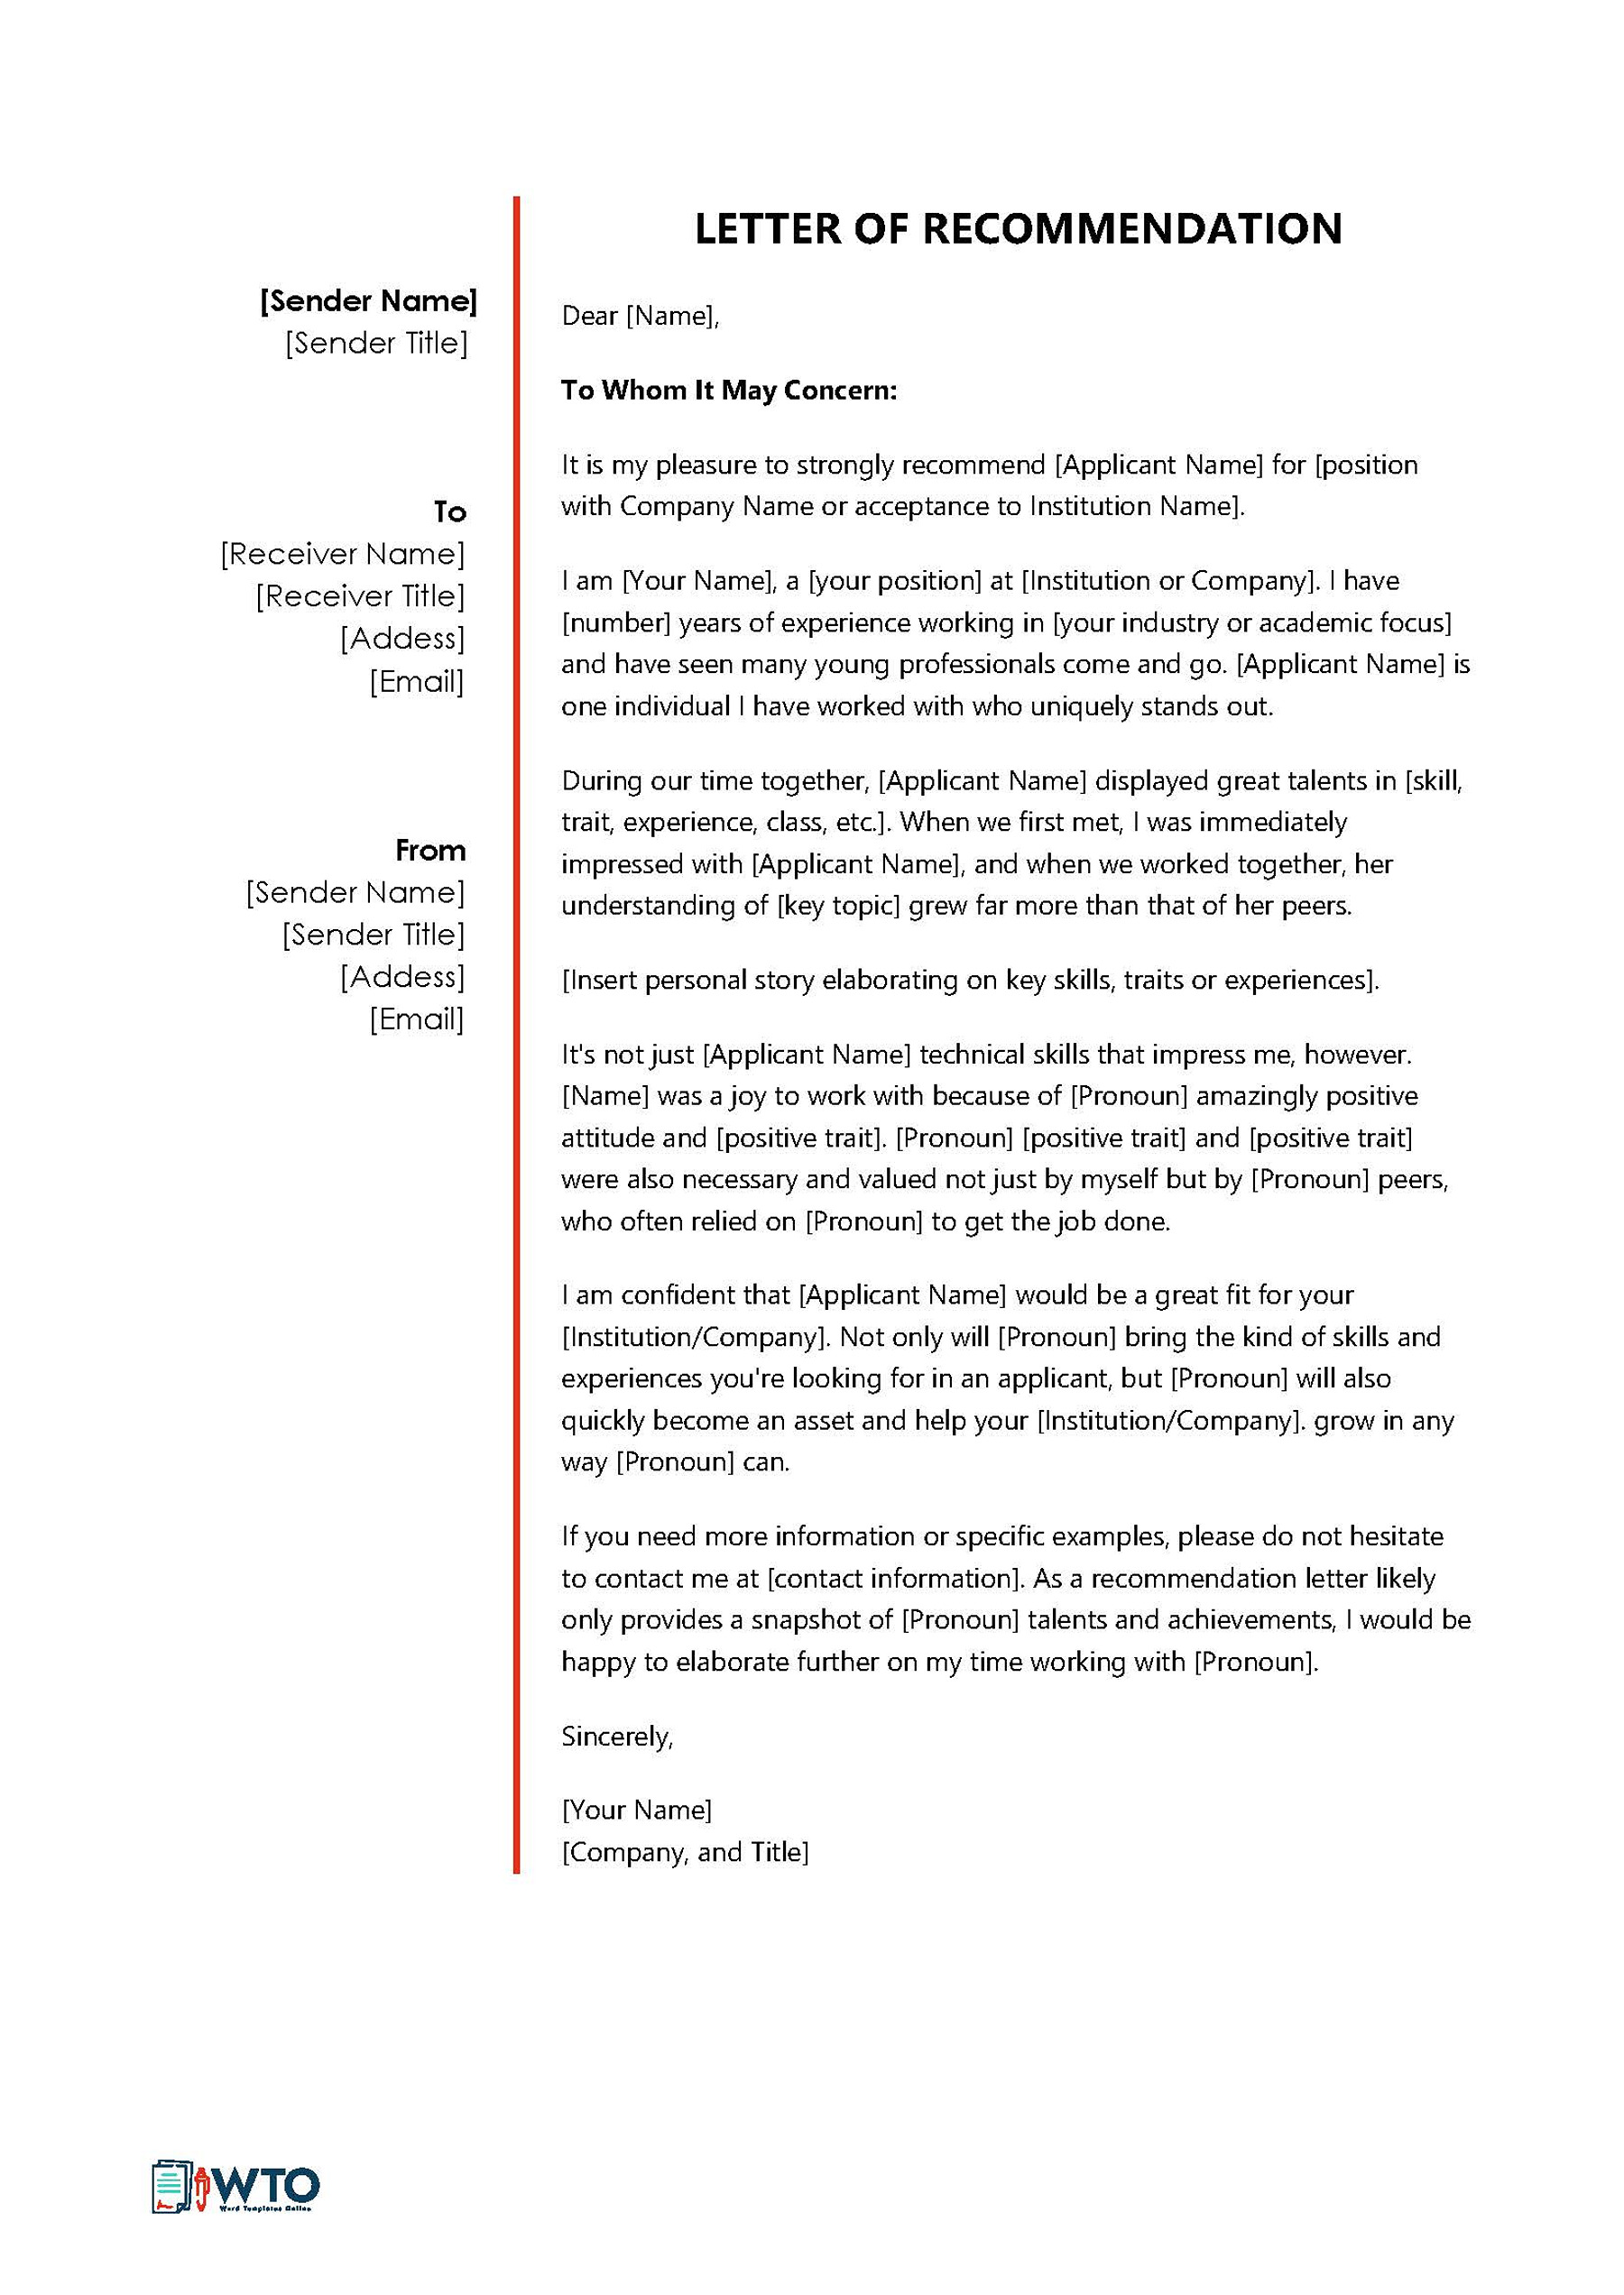 Letter of Recommendation Template